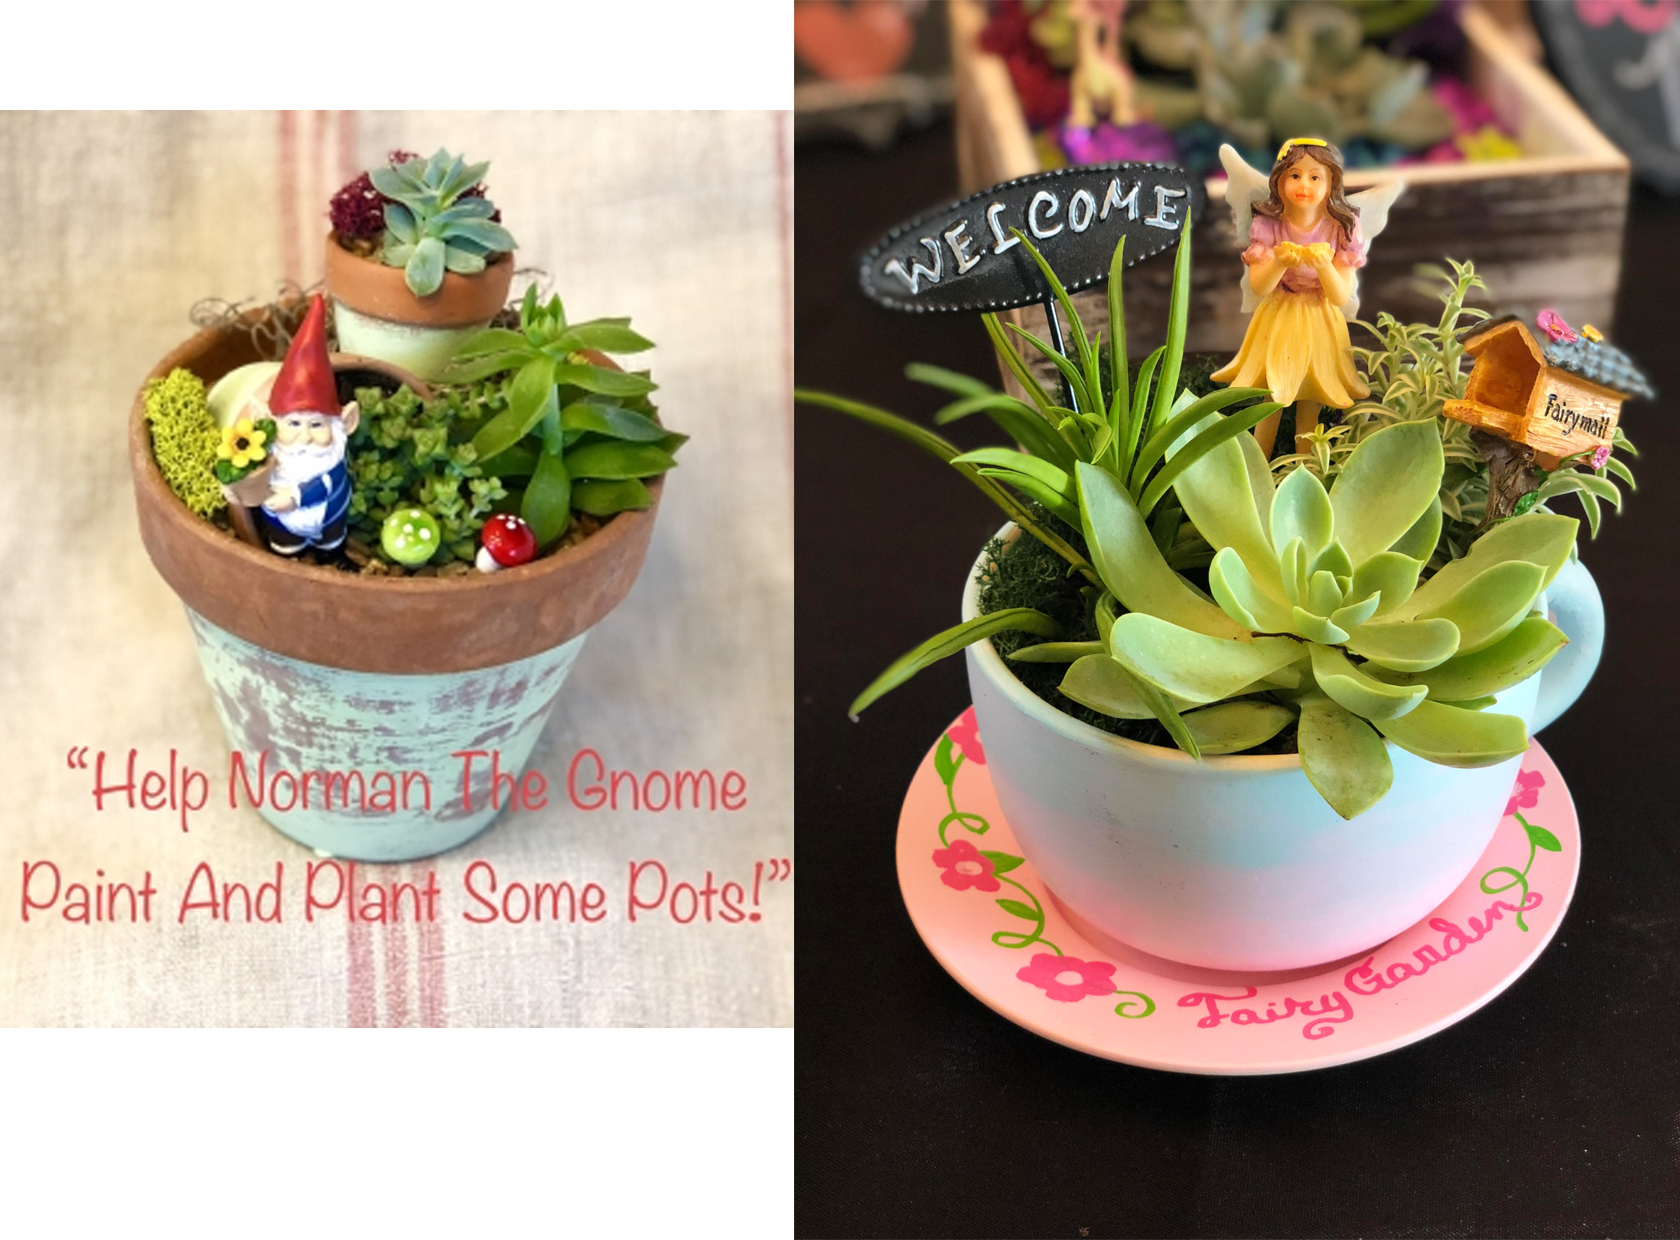 A Gnome or Fairy Garden Paint Your Pot or Teacup plant nite project by Yaymaker